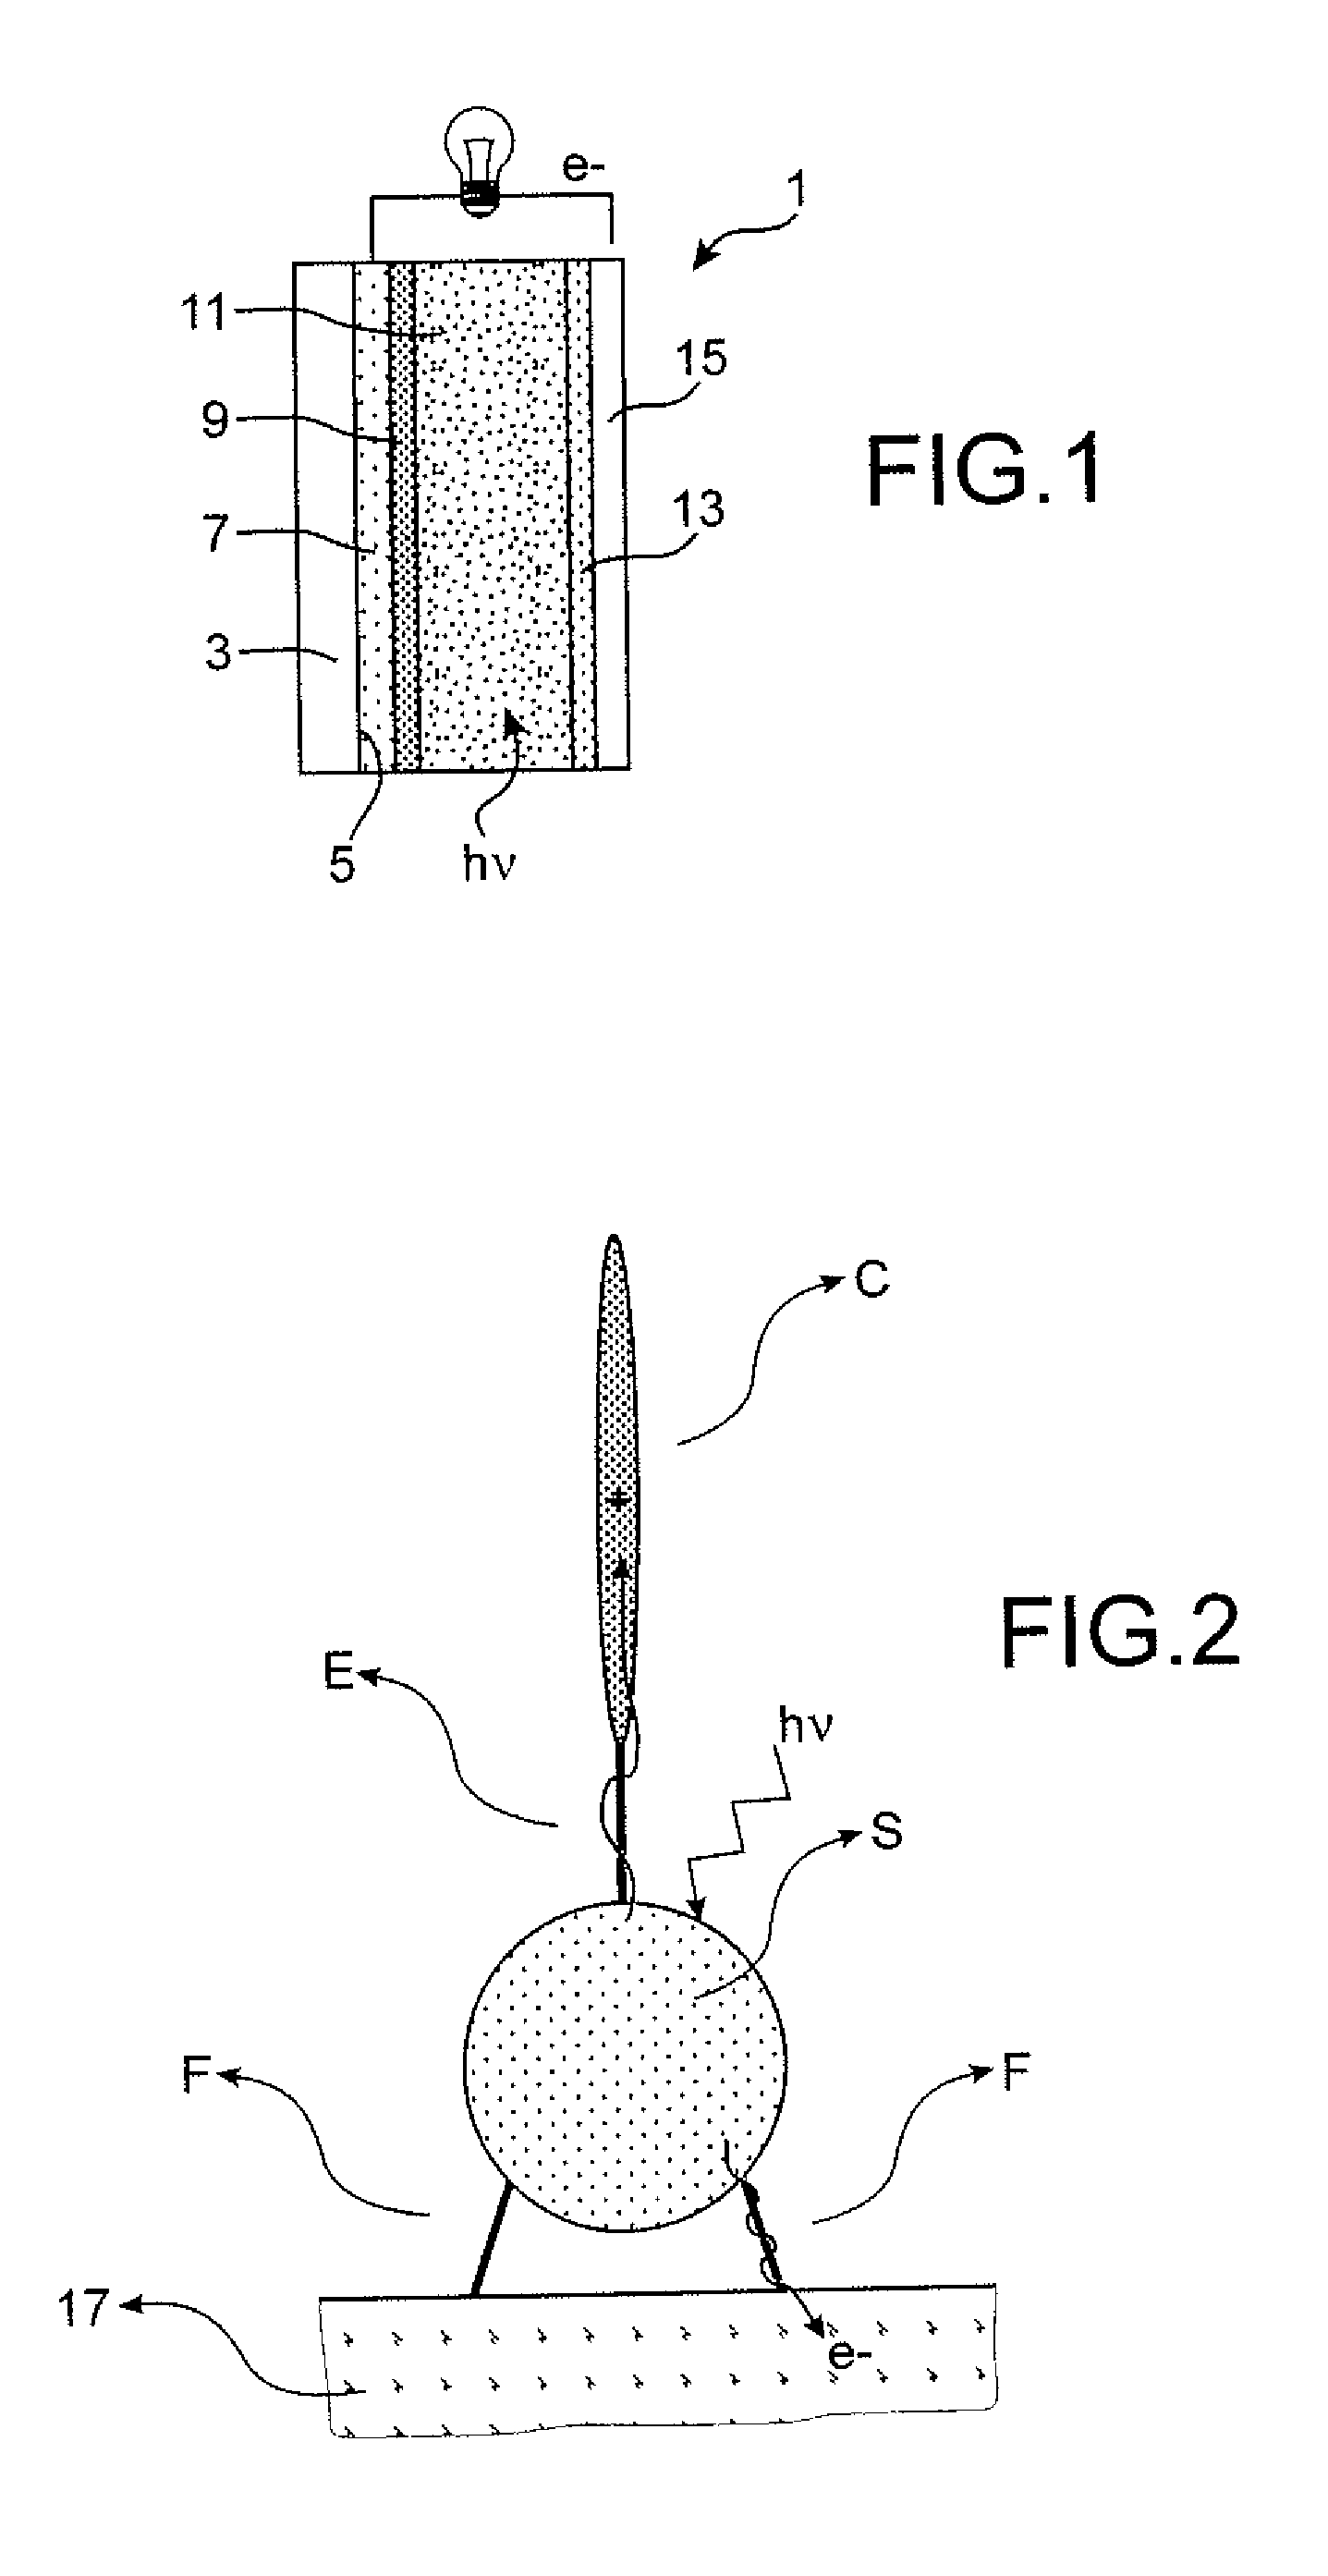 Sensitizing Complexes, Process For The Preparation Thereof, Semiconductive Inorganic/Organic Hybrid Material Comprising Them, And Photovoltaic Cell Comprising Said Material